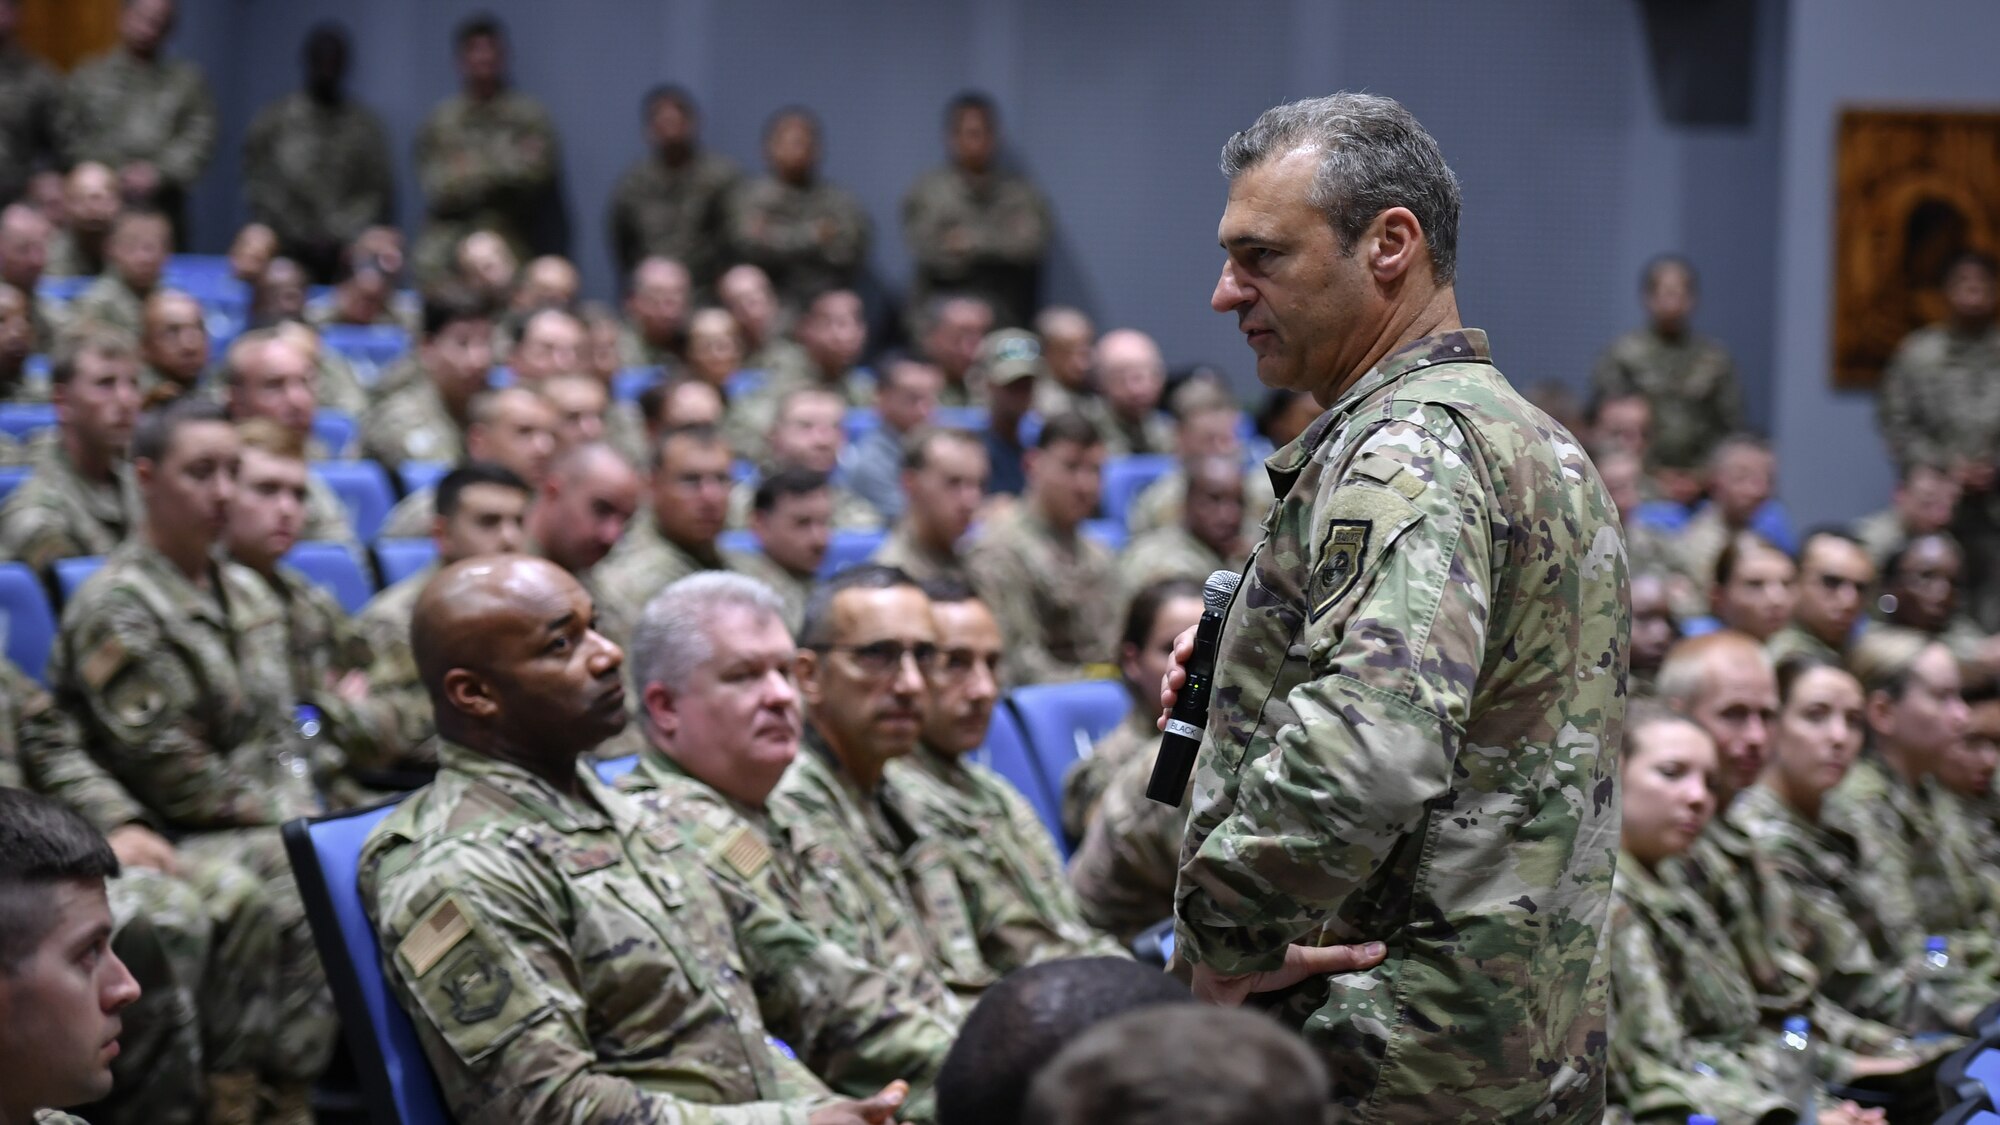 U.S. Air Force Lt. Gen. Joseph T. Guastella, U.S. Air Forces Central Command commander, addresses base personnel about their contribution to the mission and resiliency during a visit to Ali Al Salem Air Base, Kuwait, Aug. 8, 2019. AFCENT leadership visited the 386th Air Expeditionary Wing to discuss how each Airman's role contributes to the mission, to take questions and address concerns. (U.S. Air Force photo by Staff Sgt. Mozer O. Da Cunha)